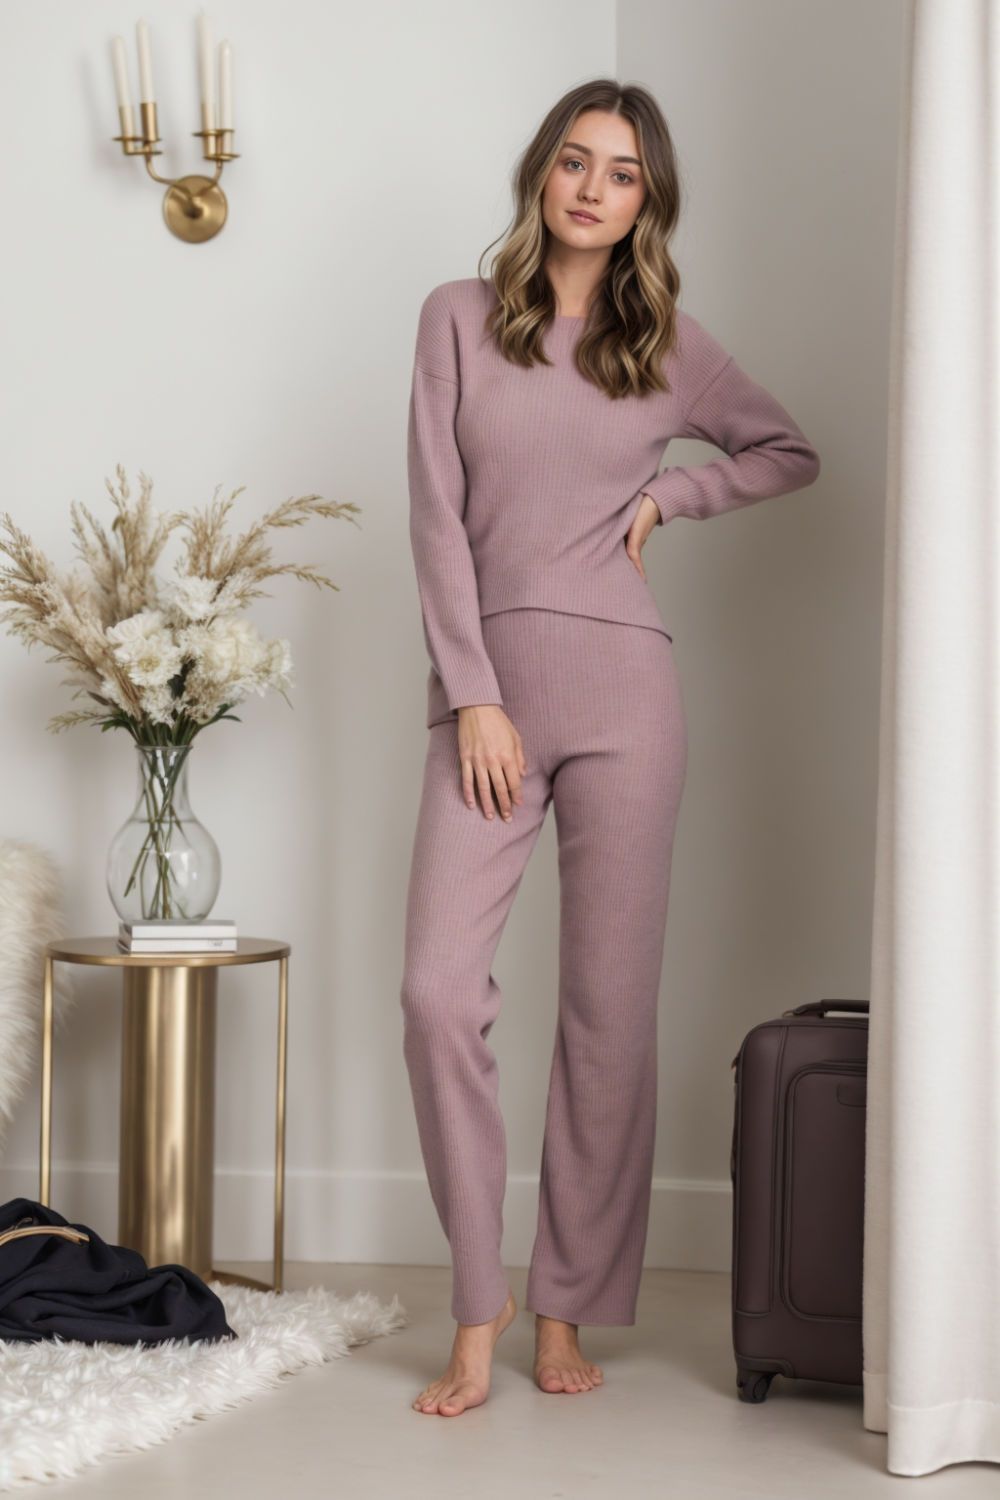 comfy chic knit set airport outfit